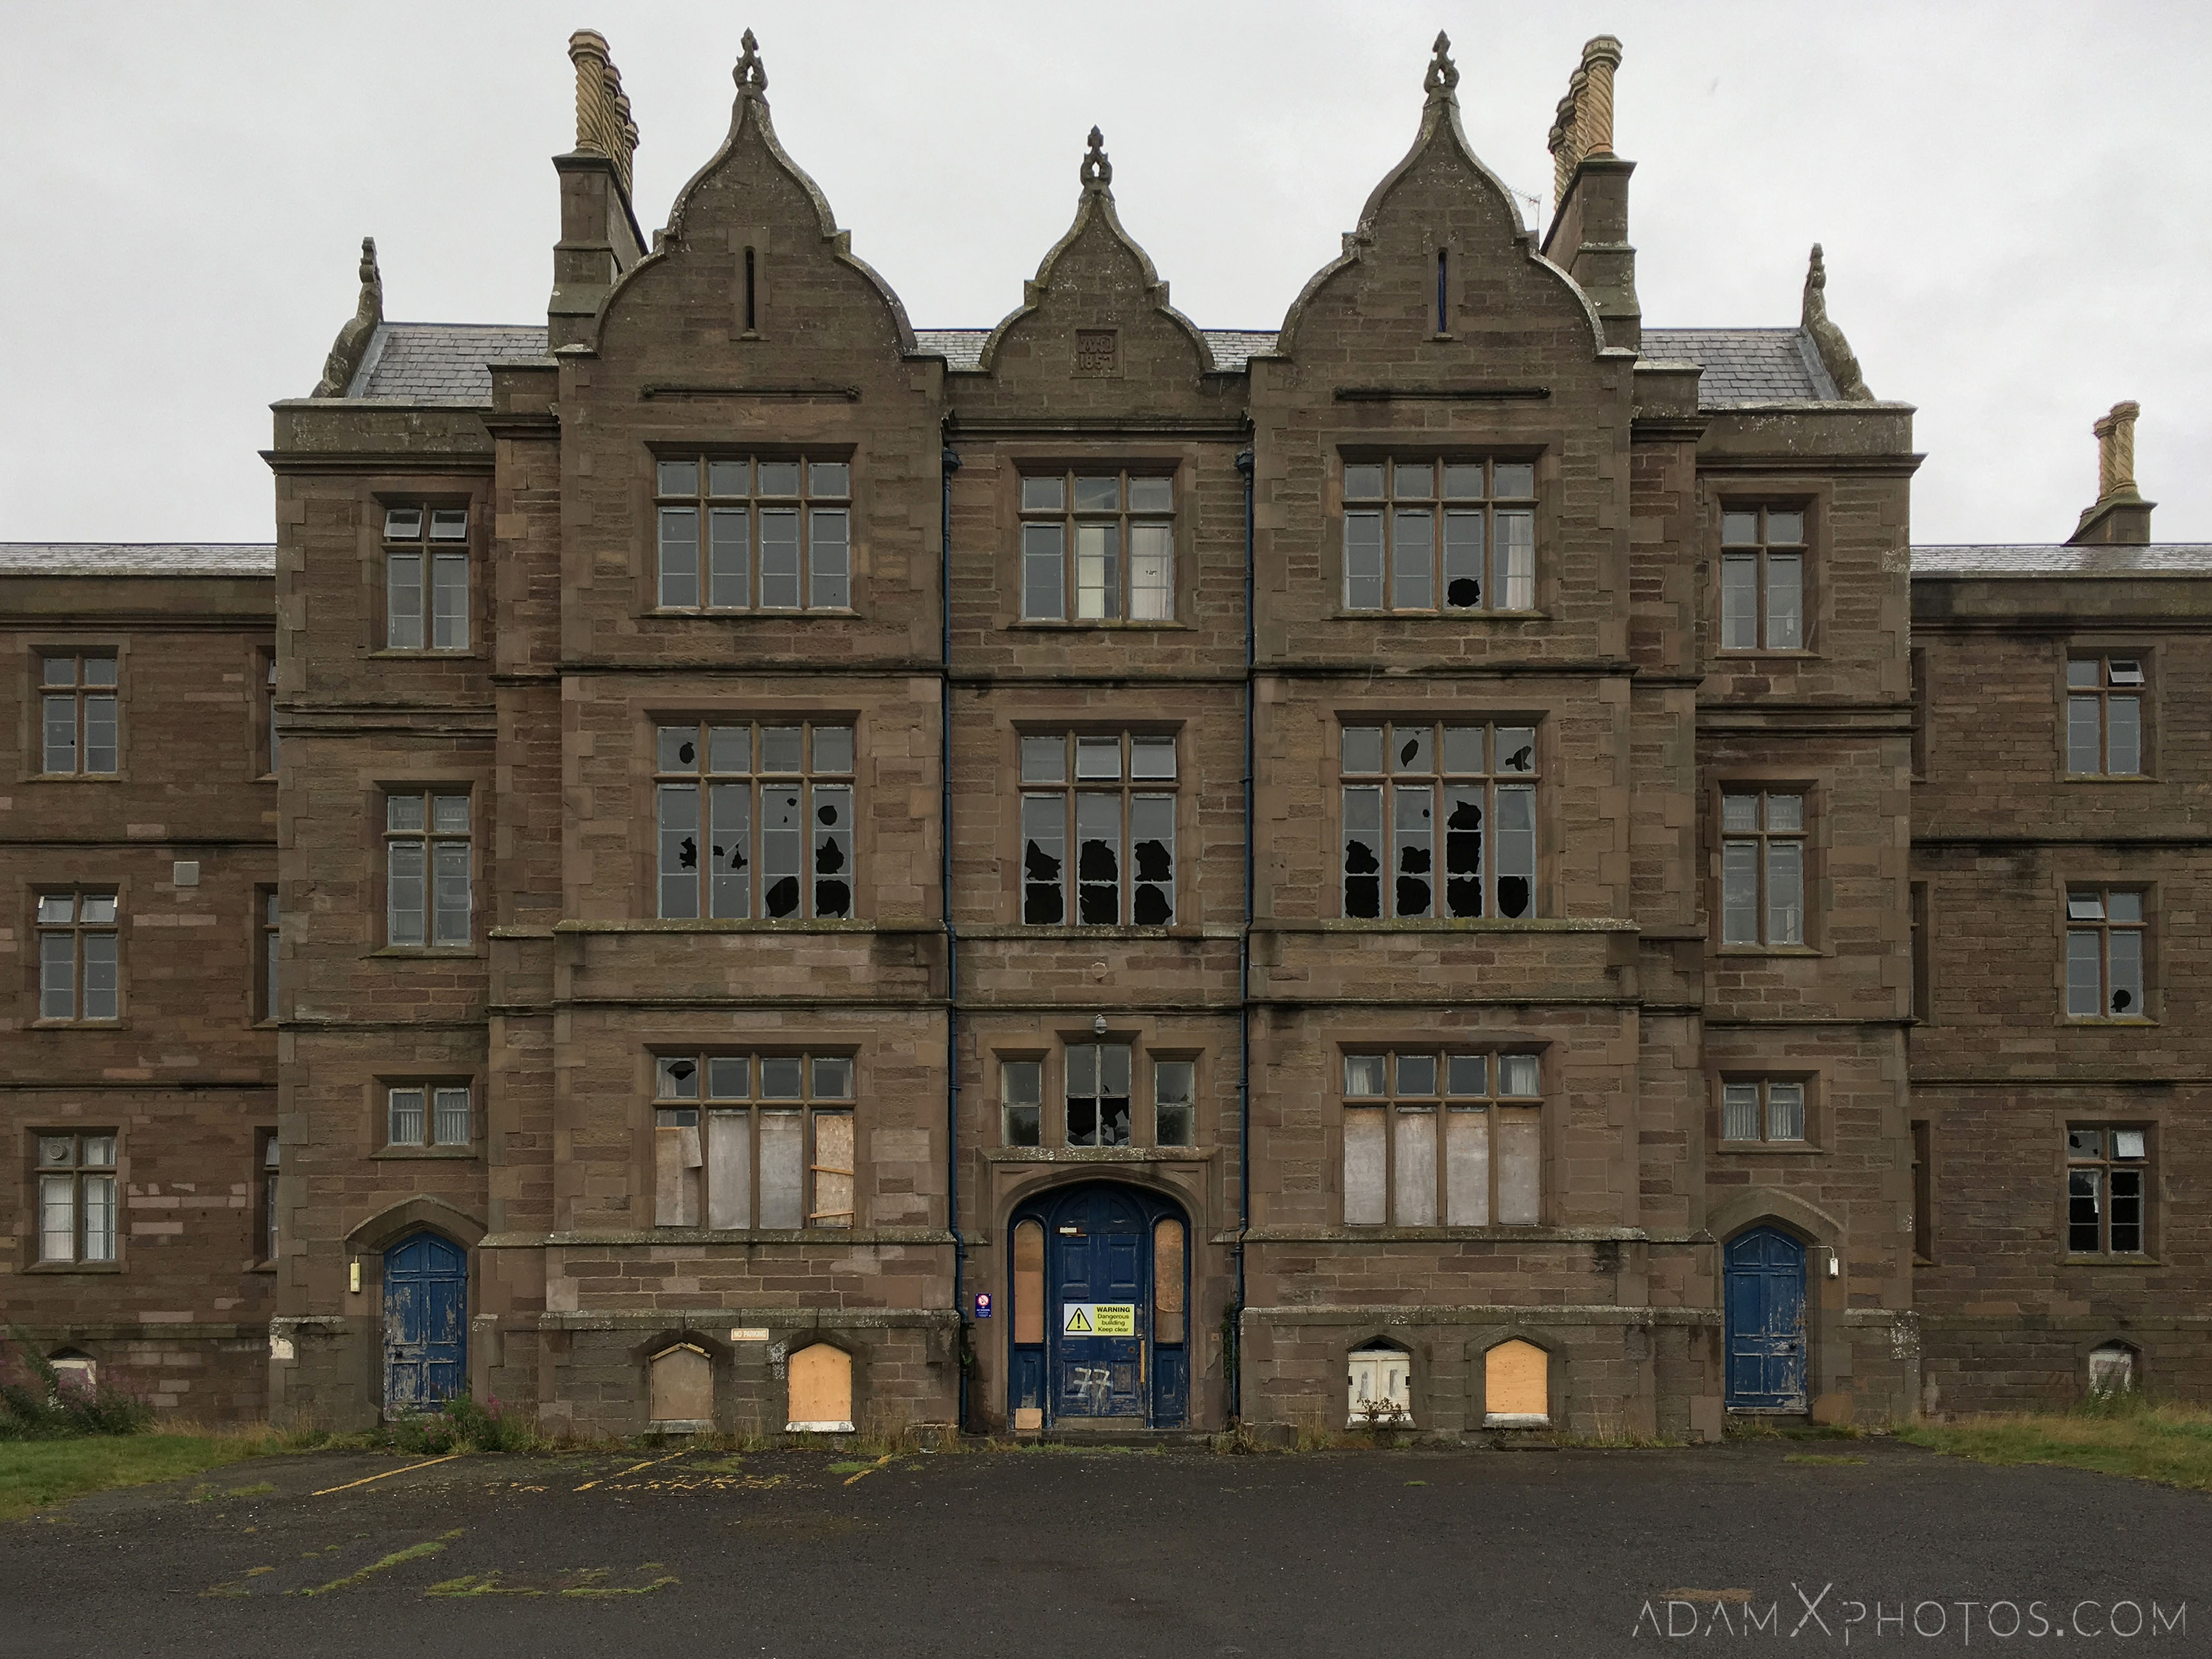 Front view entrance Sunnyside Royal Hospital Montrose Scotland Adam X Urbex Urban Exploration Access 2018 Abandoned decay ruins lost forgotten derelict location creepy haunting eerie